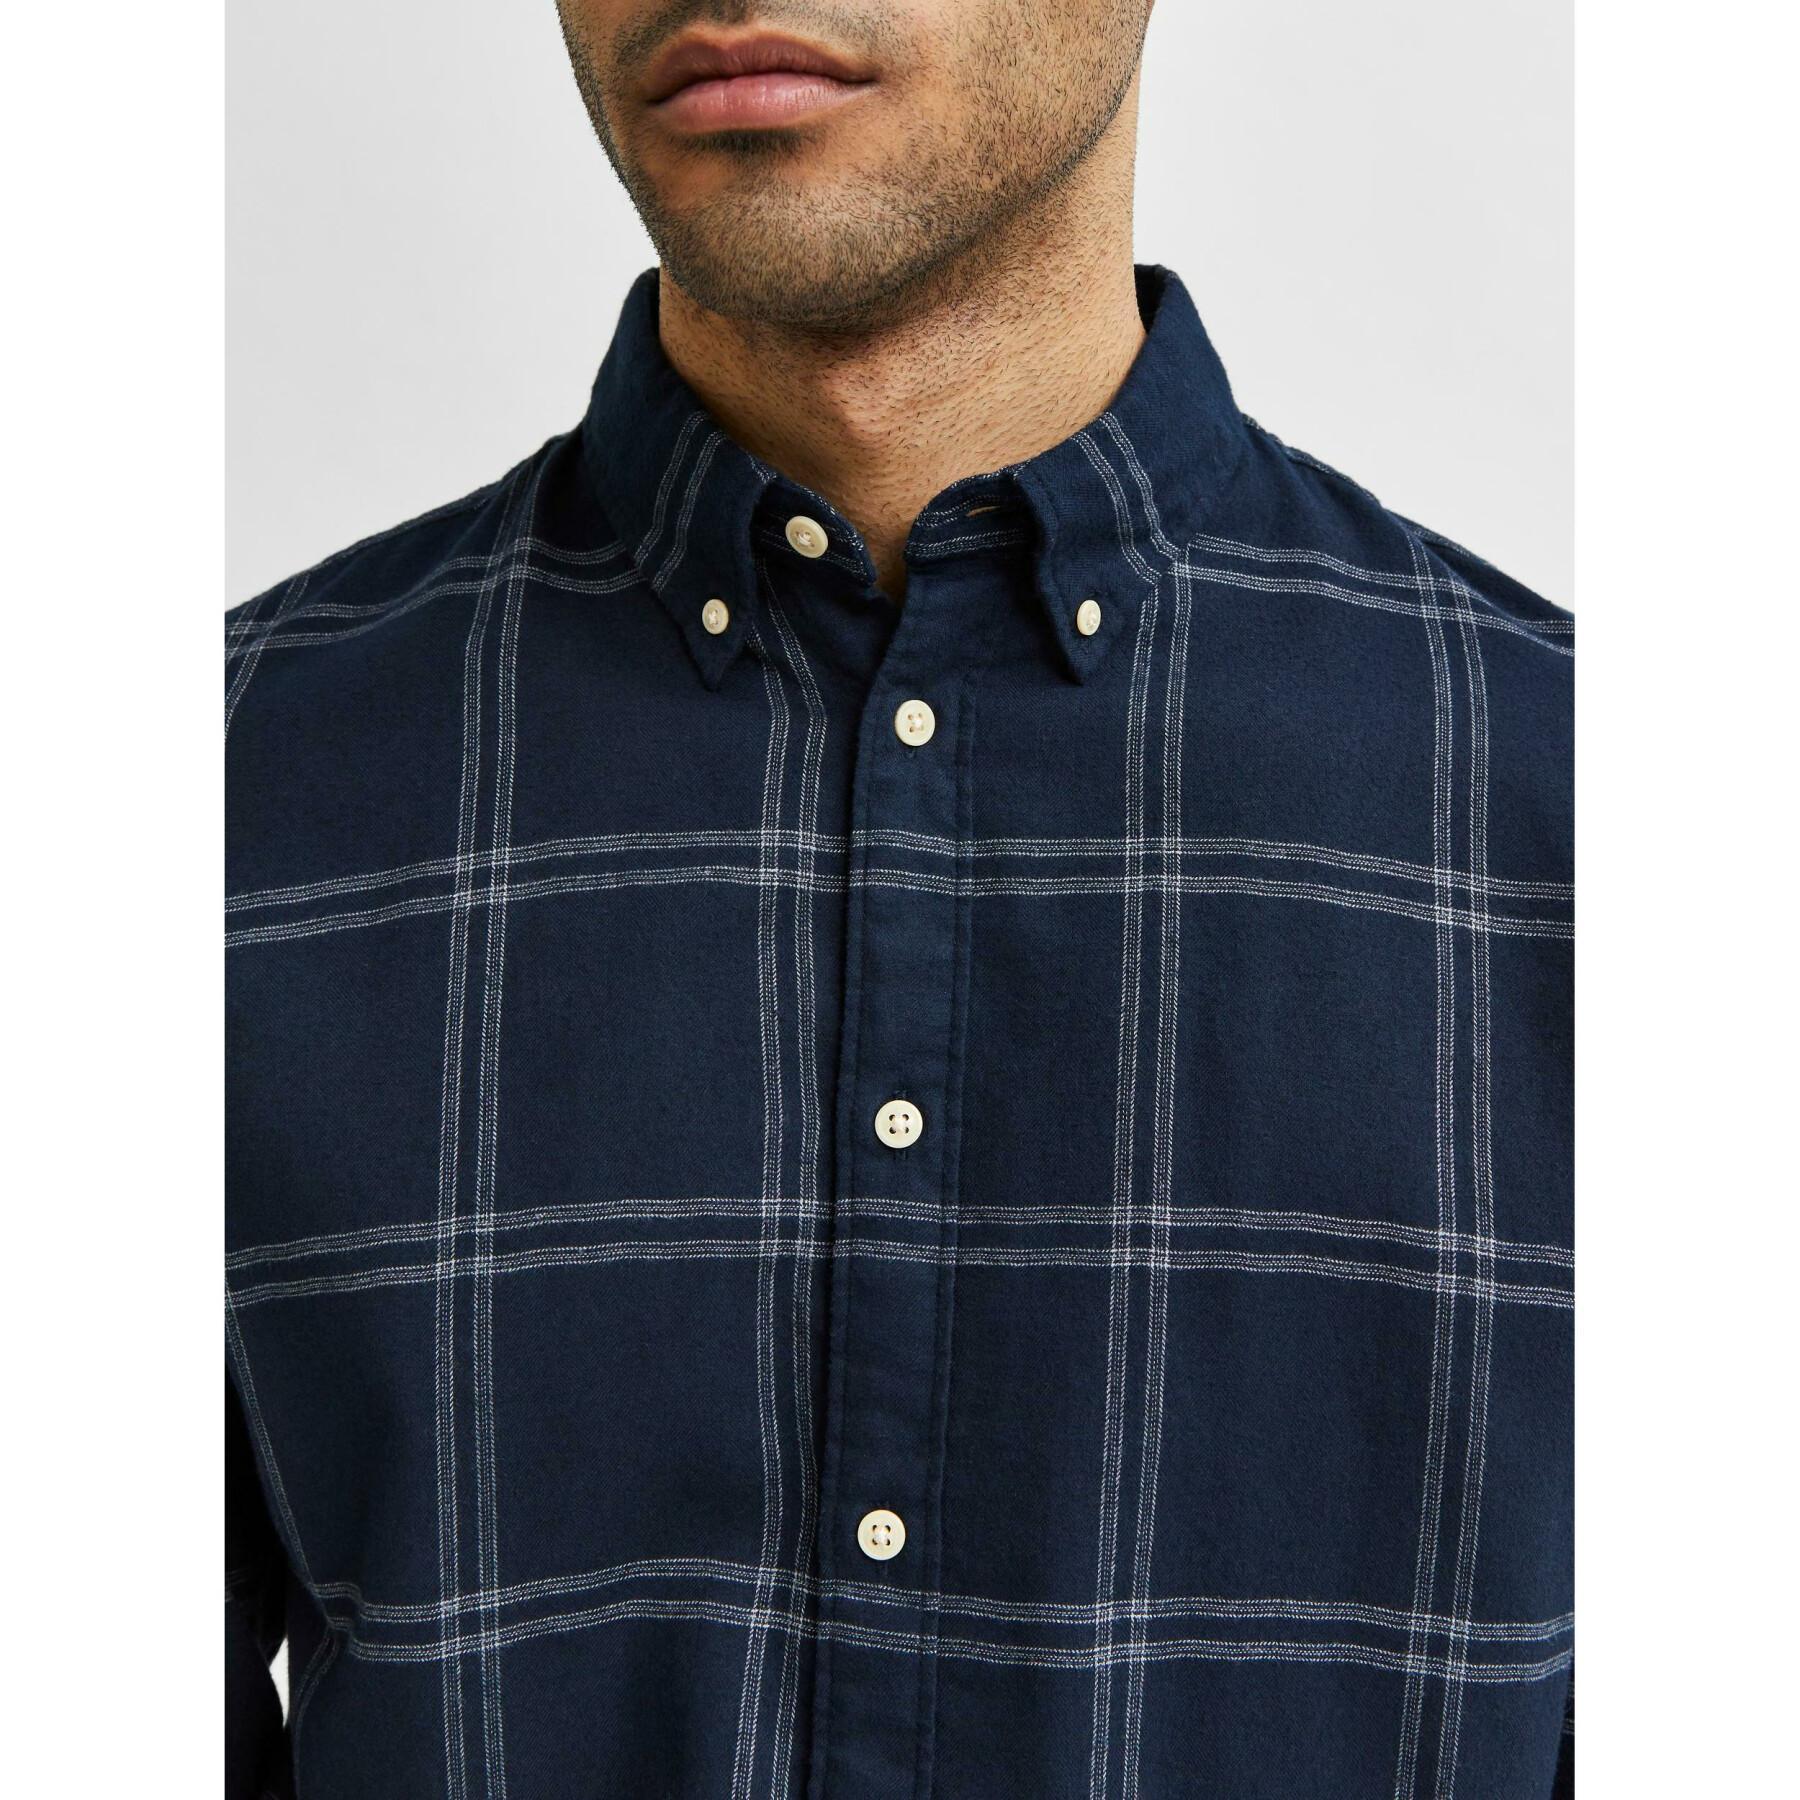 Shirt Selected flannel manches longues slim